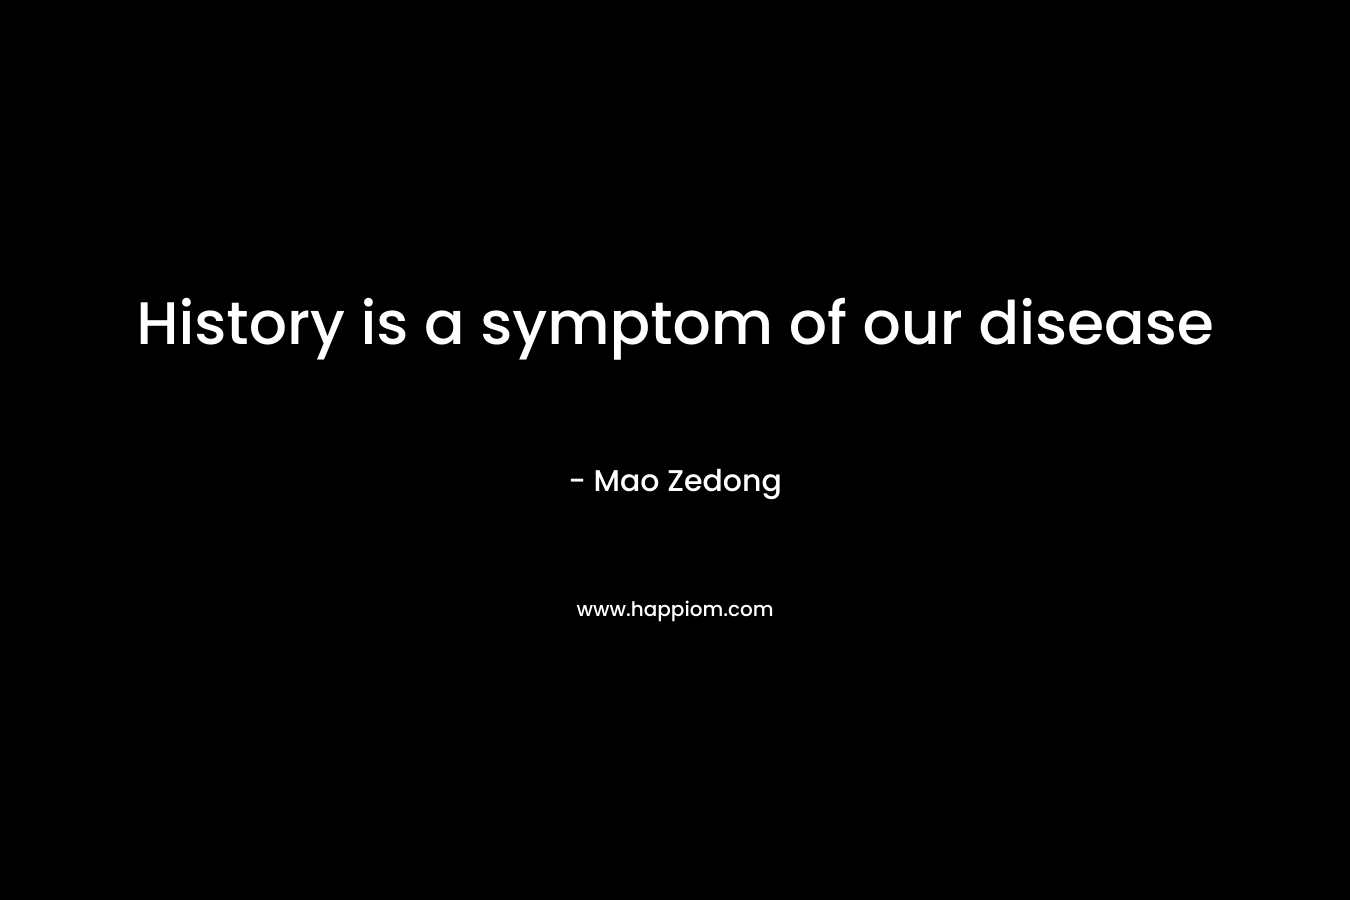 History is a symptom of our disease